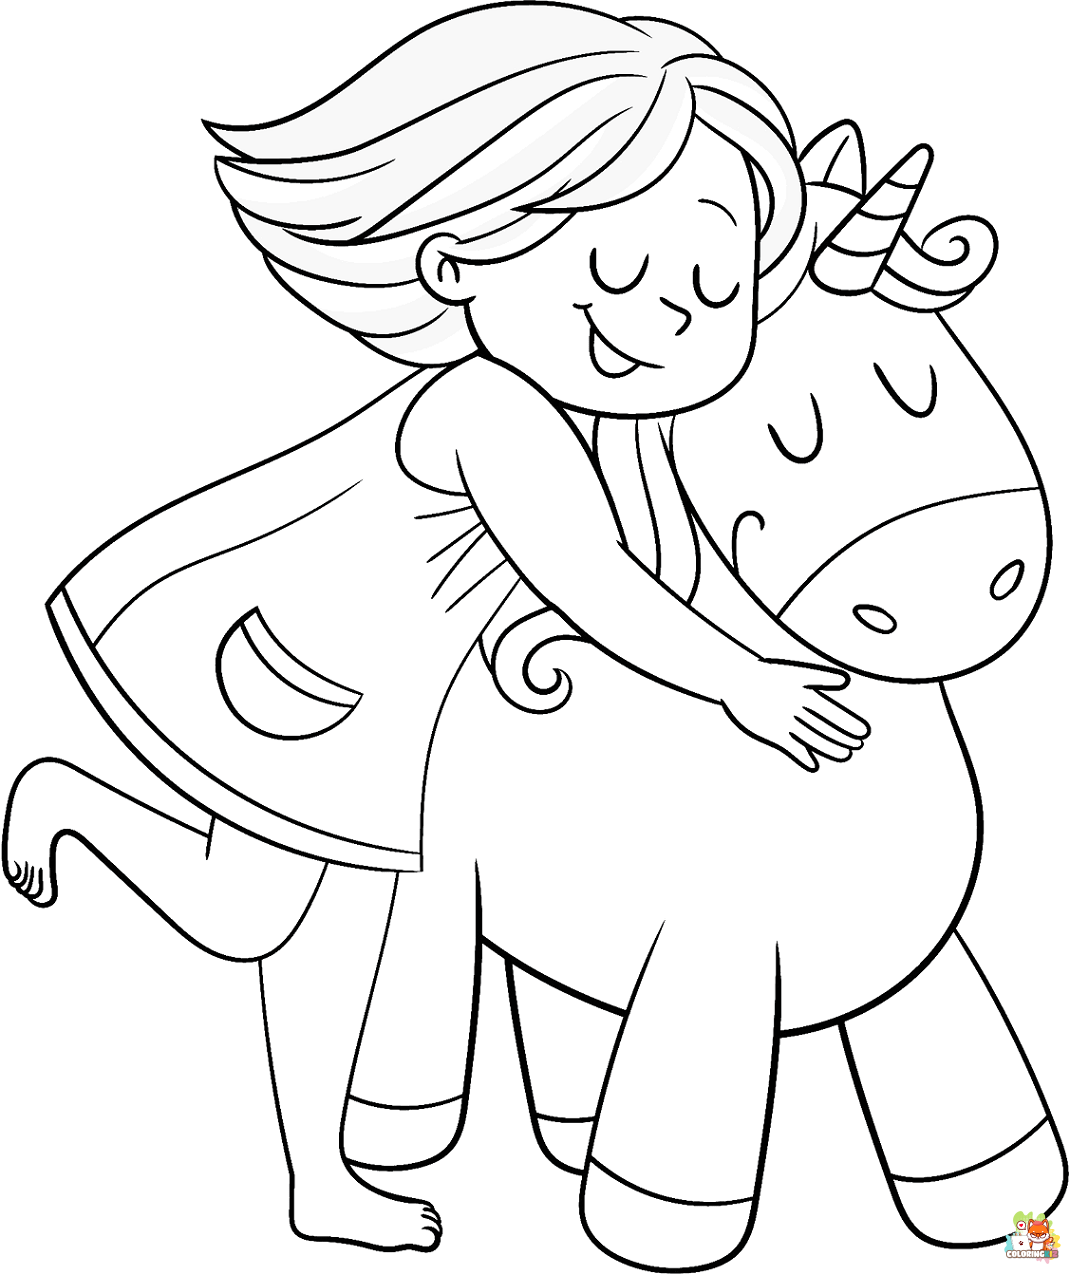 Cute Fat Unicorn Coloring Pages 2